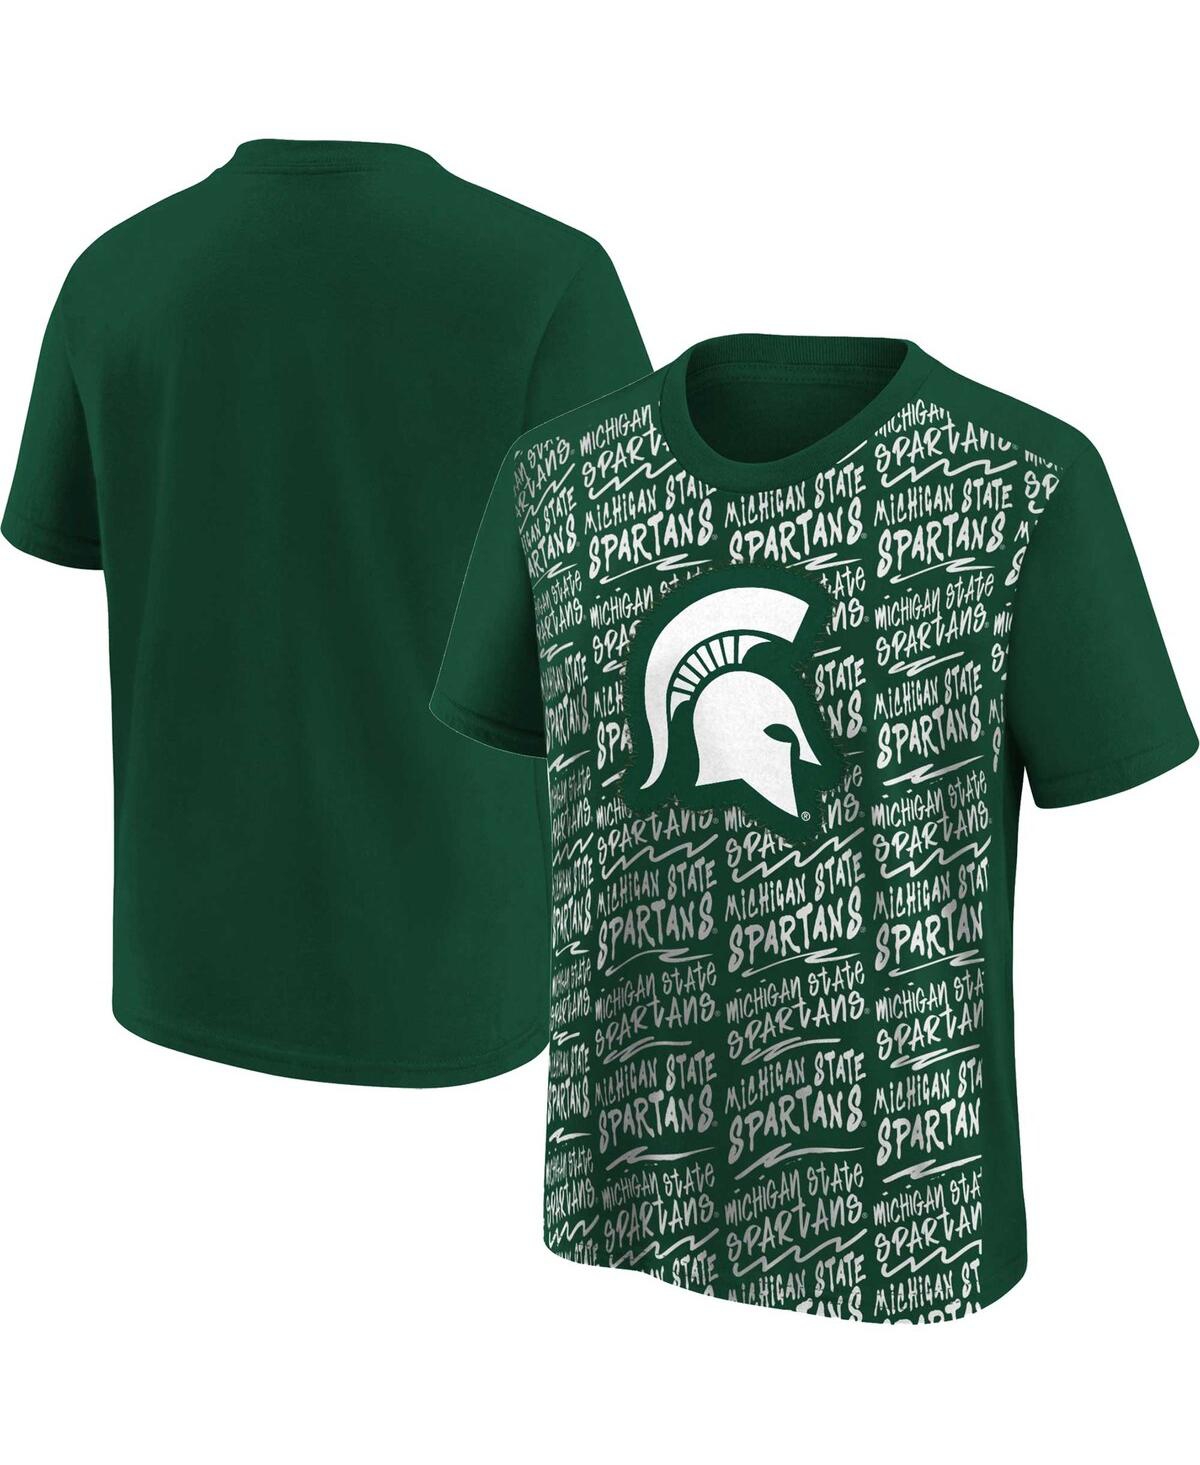 Outerstuff Kids' Big Boys And Girls Green Michigan State Spartans Exemplary T-shirt